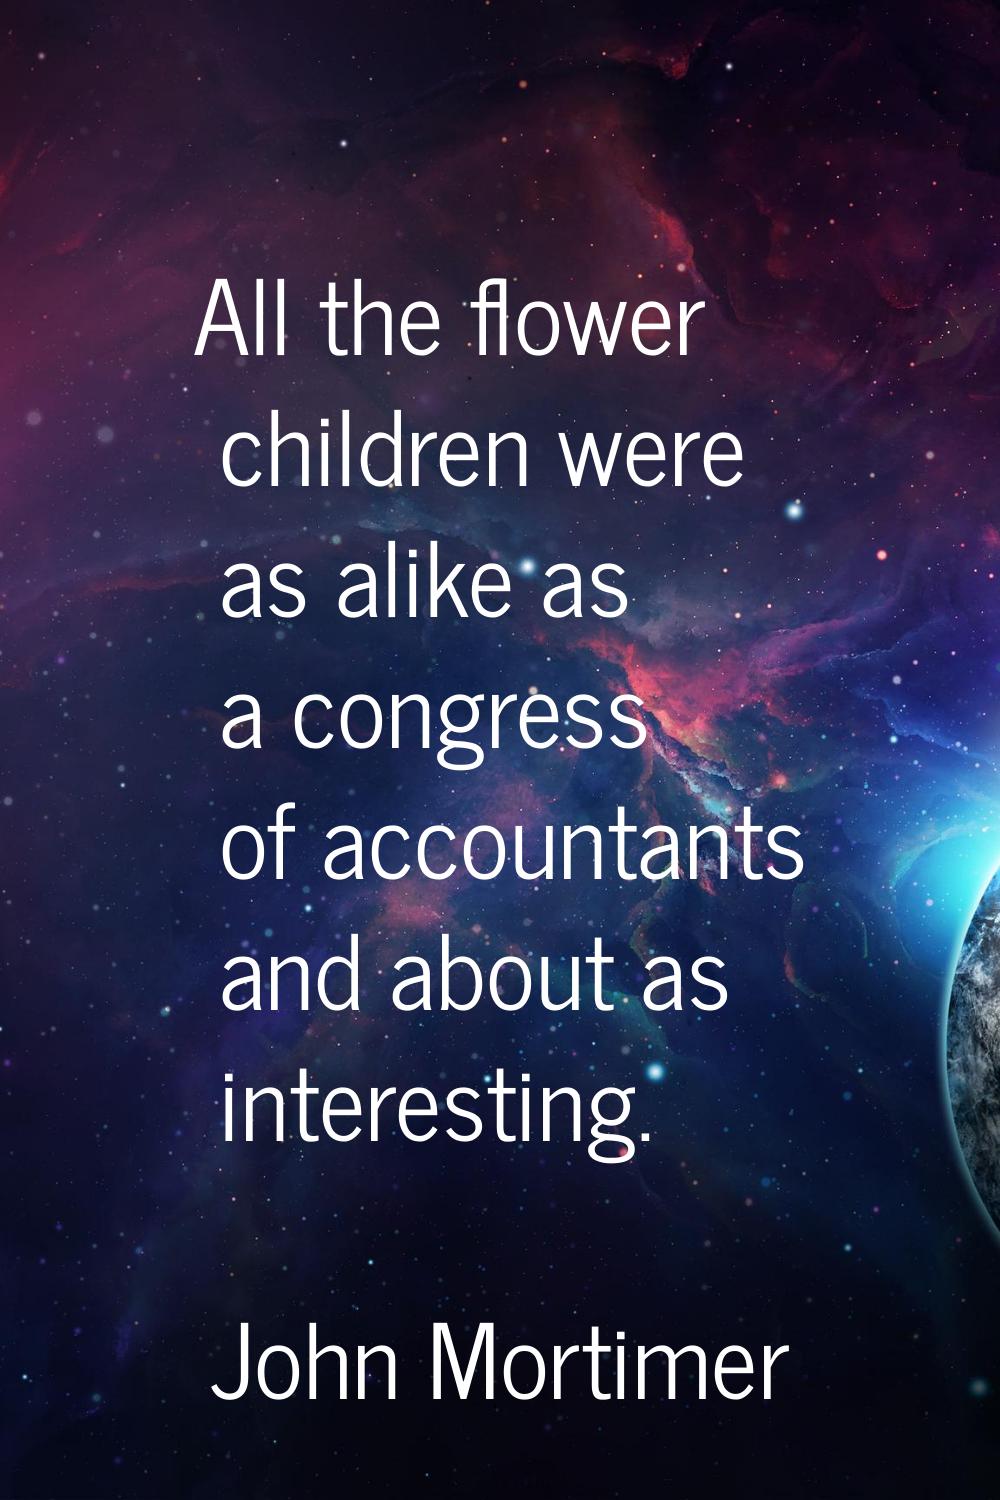 All the flower children were as alike as a congress of accountants and about as interesting.